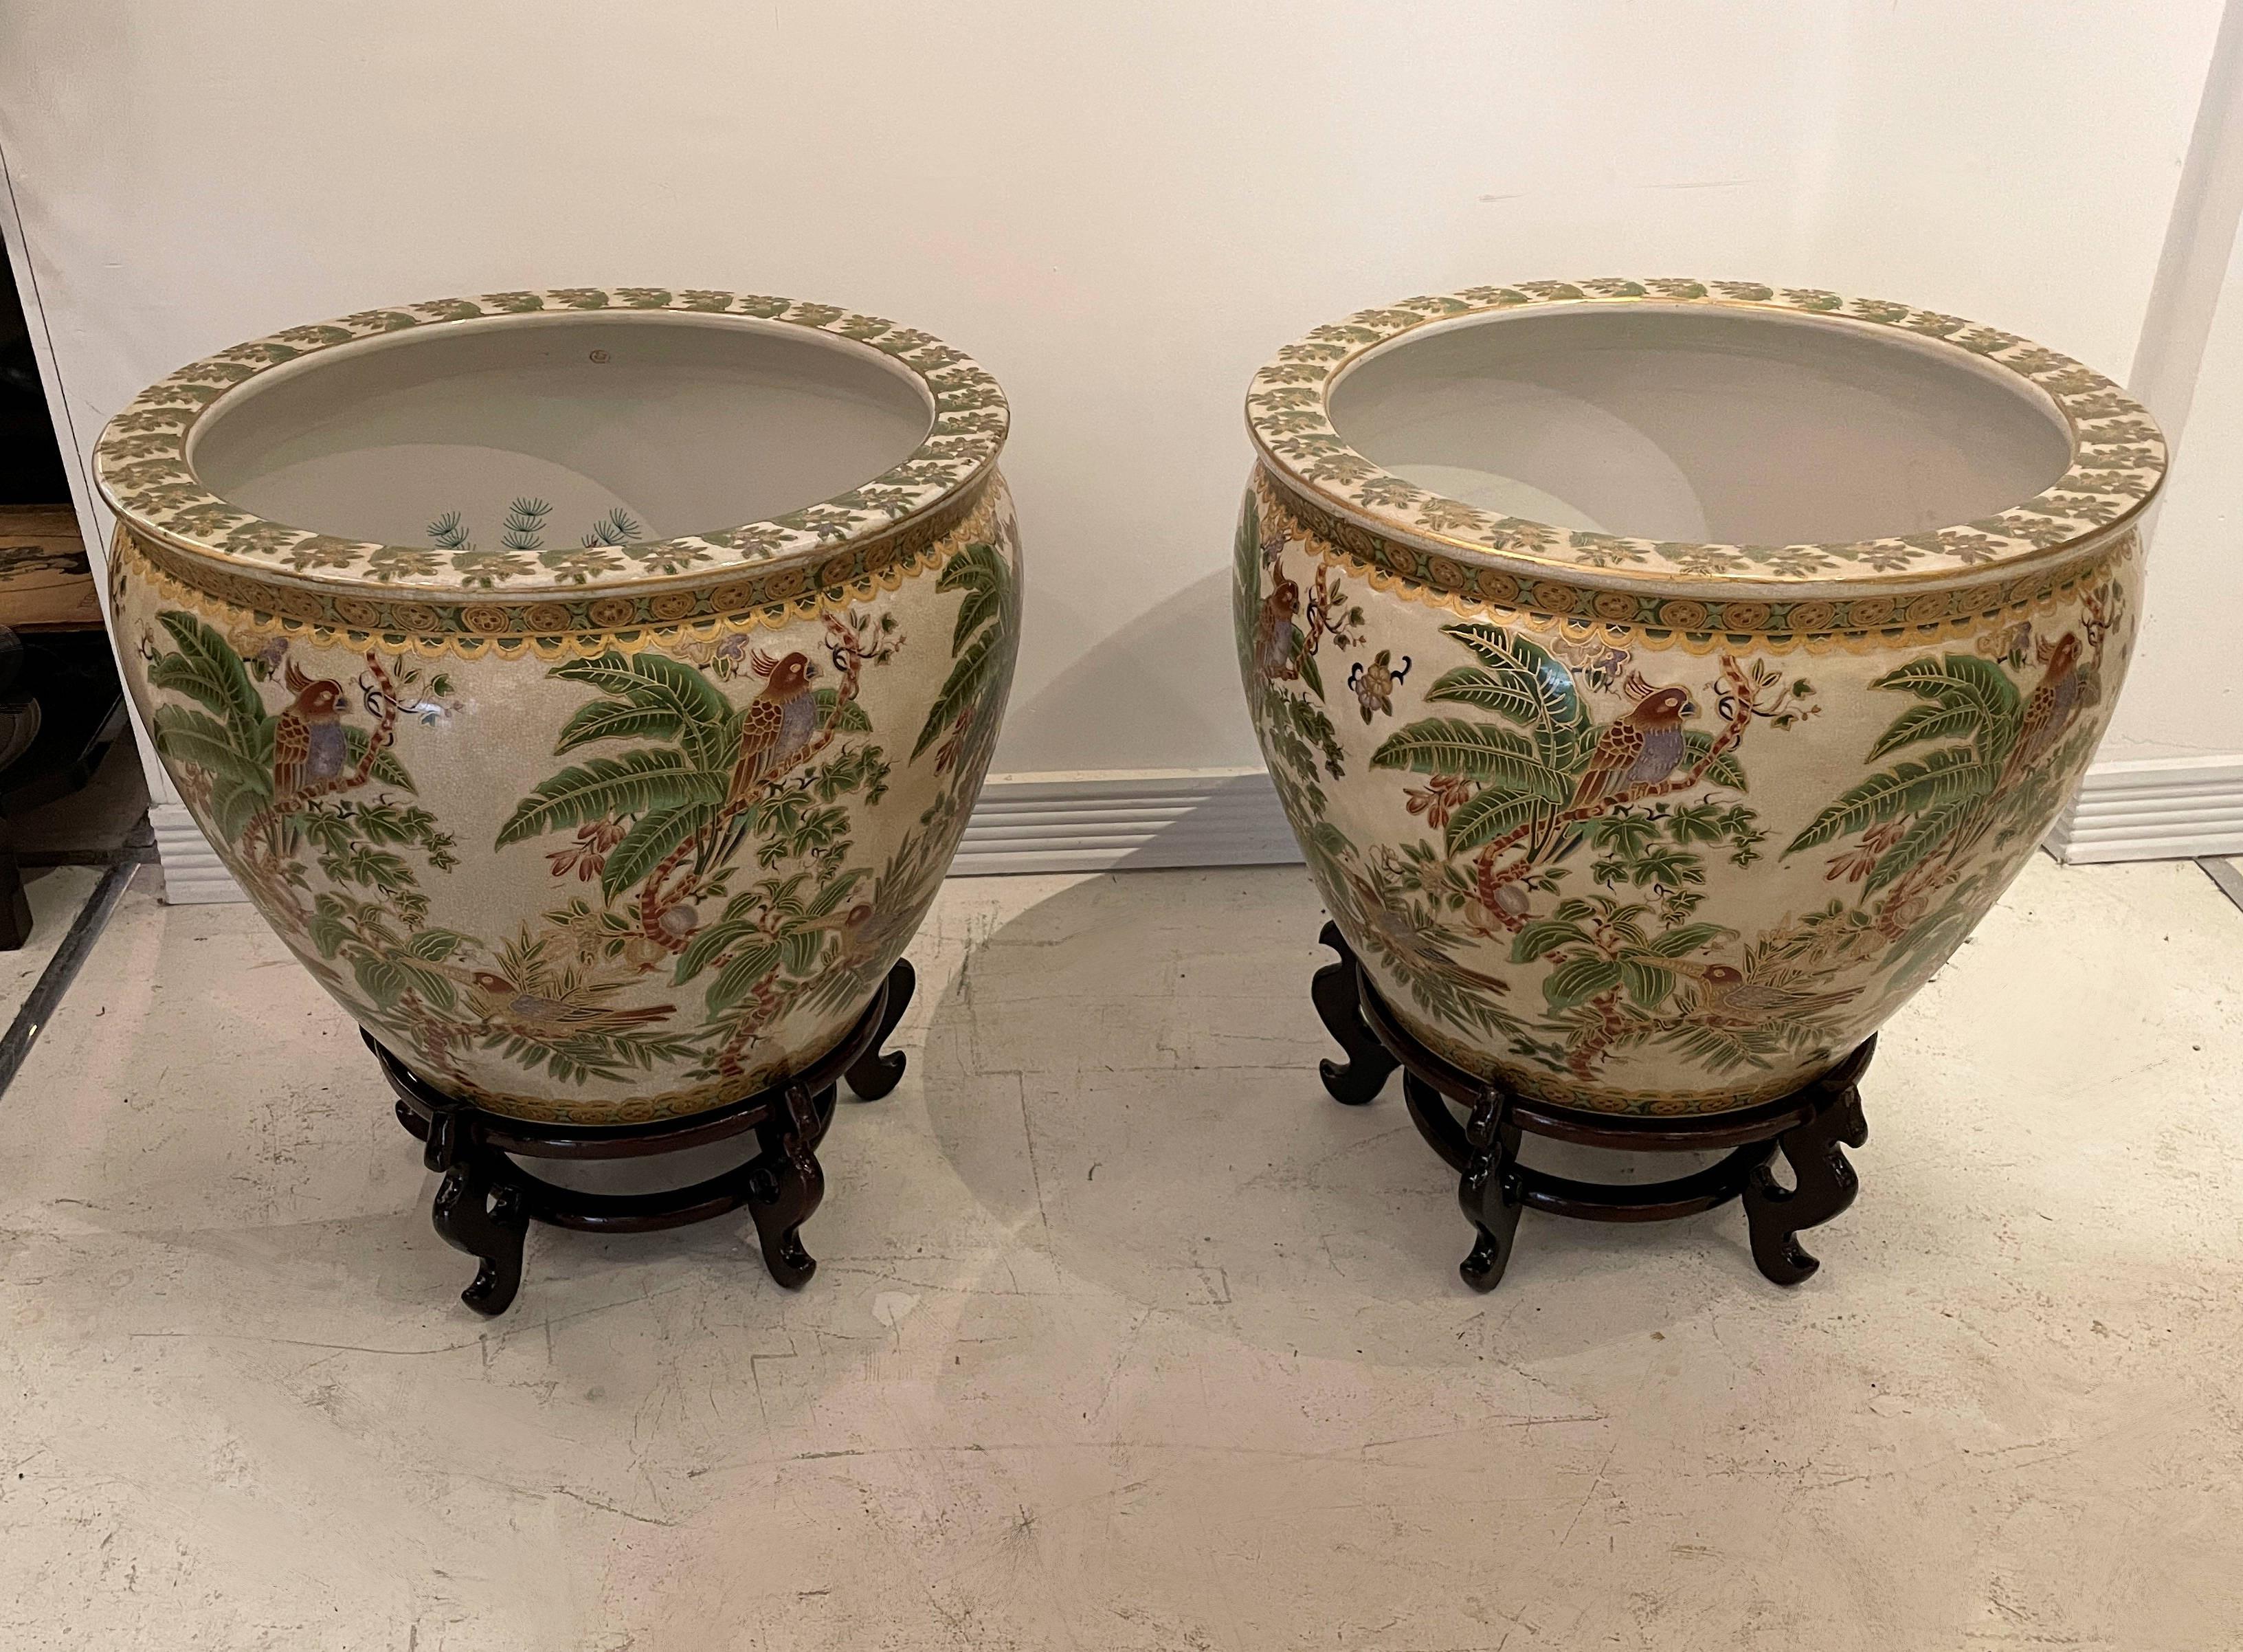 Chinoiserie Large Tropical Pair of Porcelain Chinese Fishbowl Planters